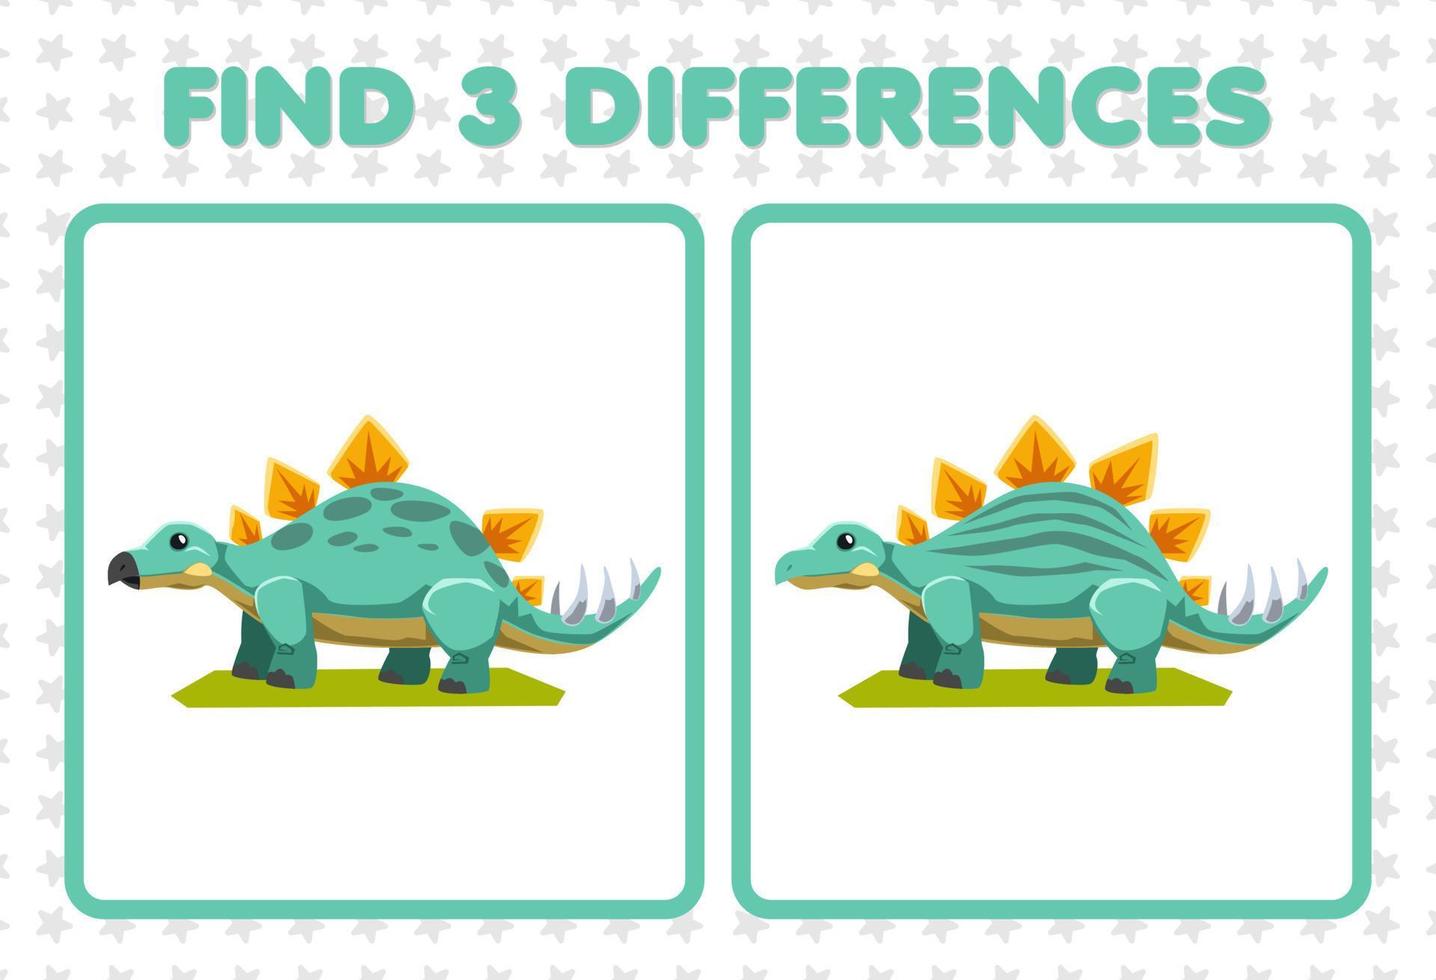 Education game for children find three differences between two cute prehistoric dinosaur stegosaurus vector